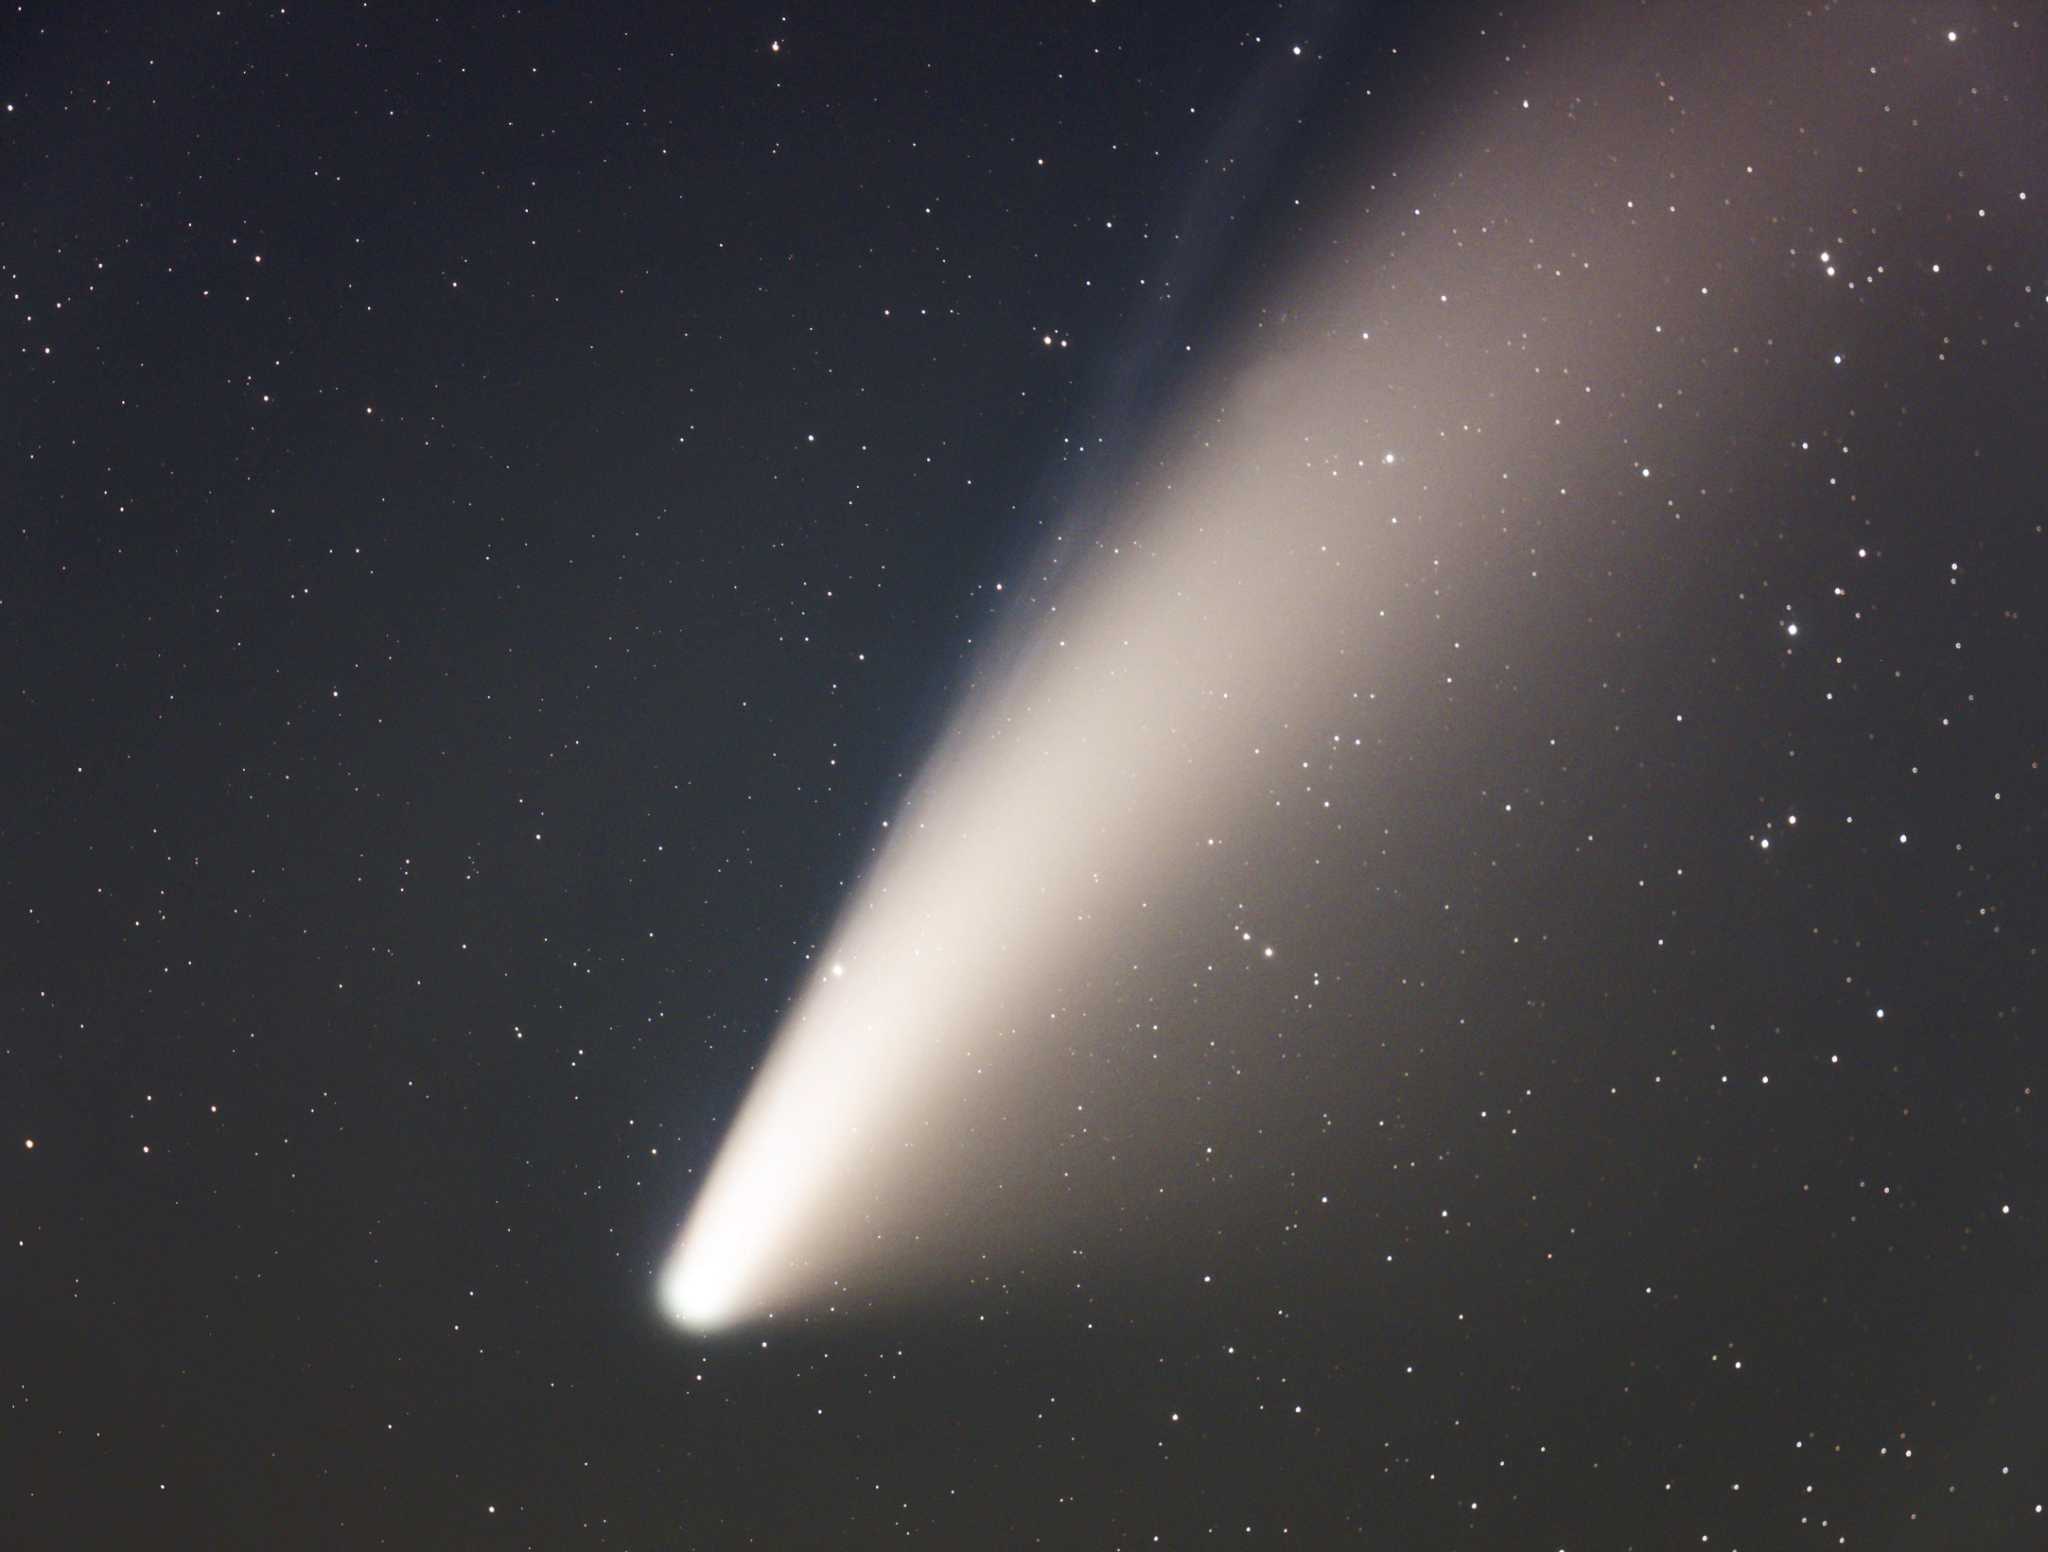 Comet NEOWISE: Where to view in Southern Nevada, Local Nevada